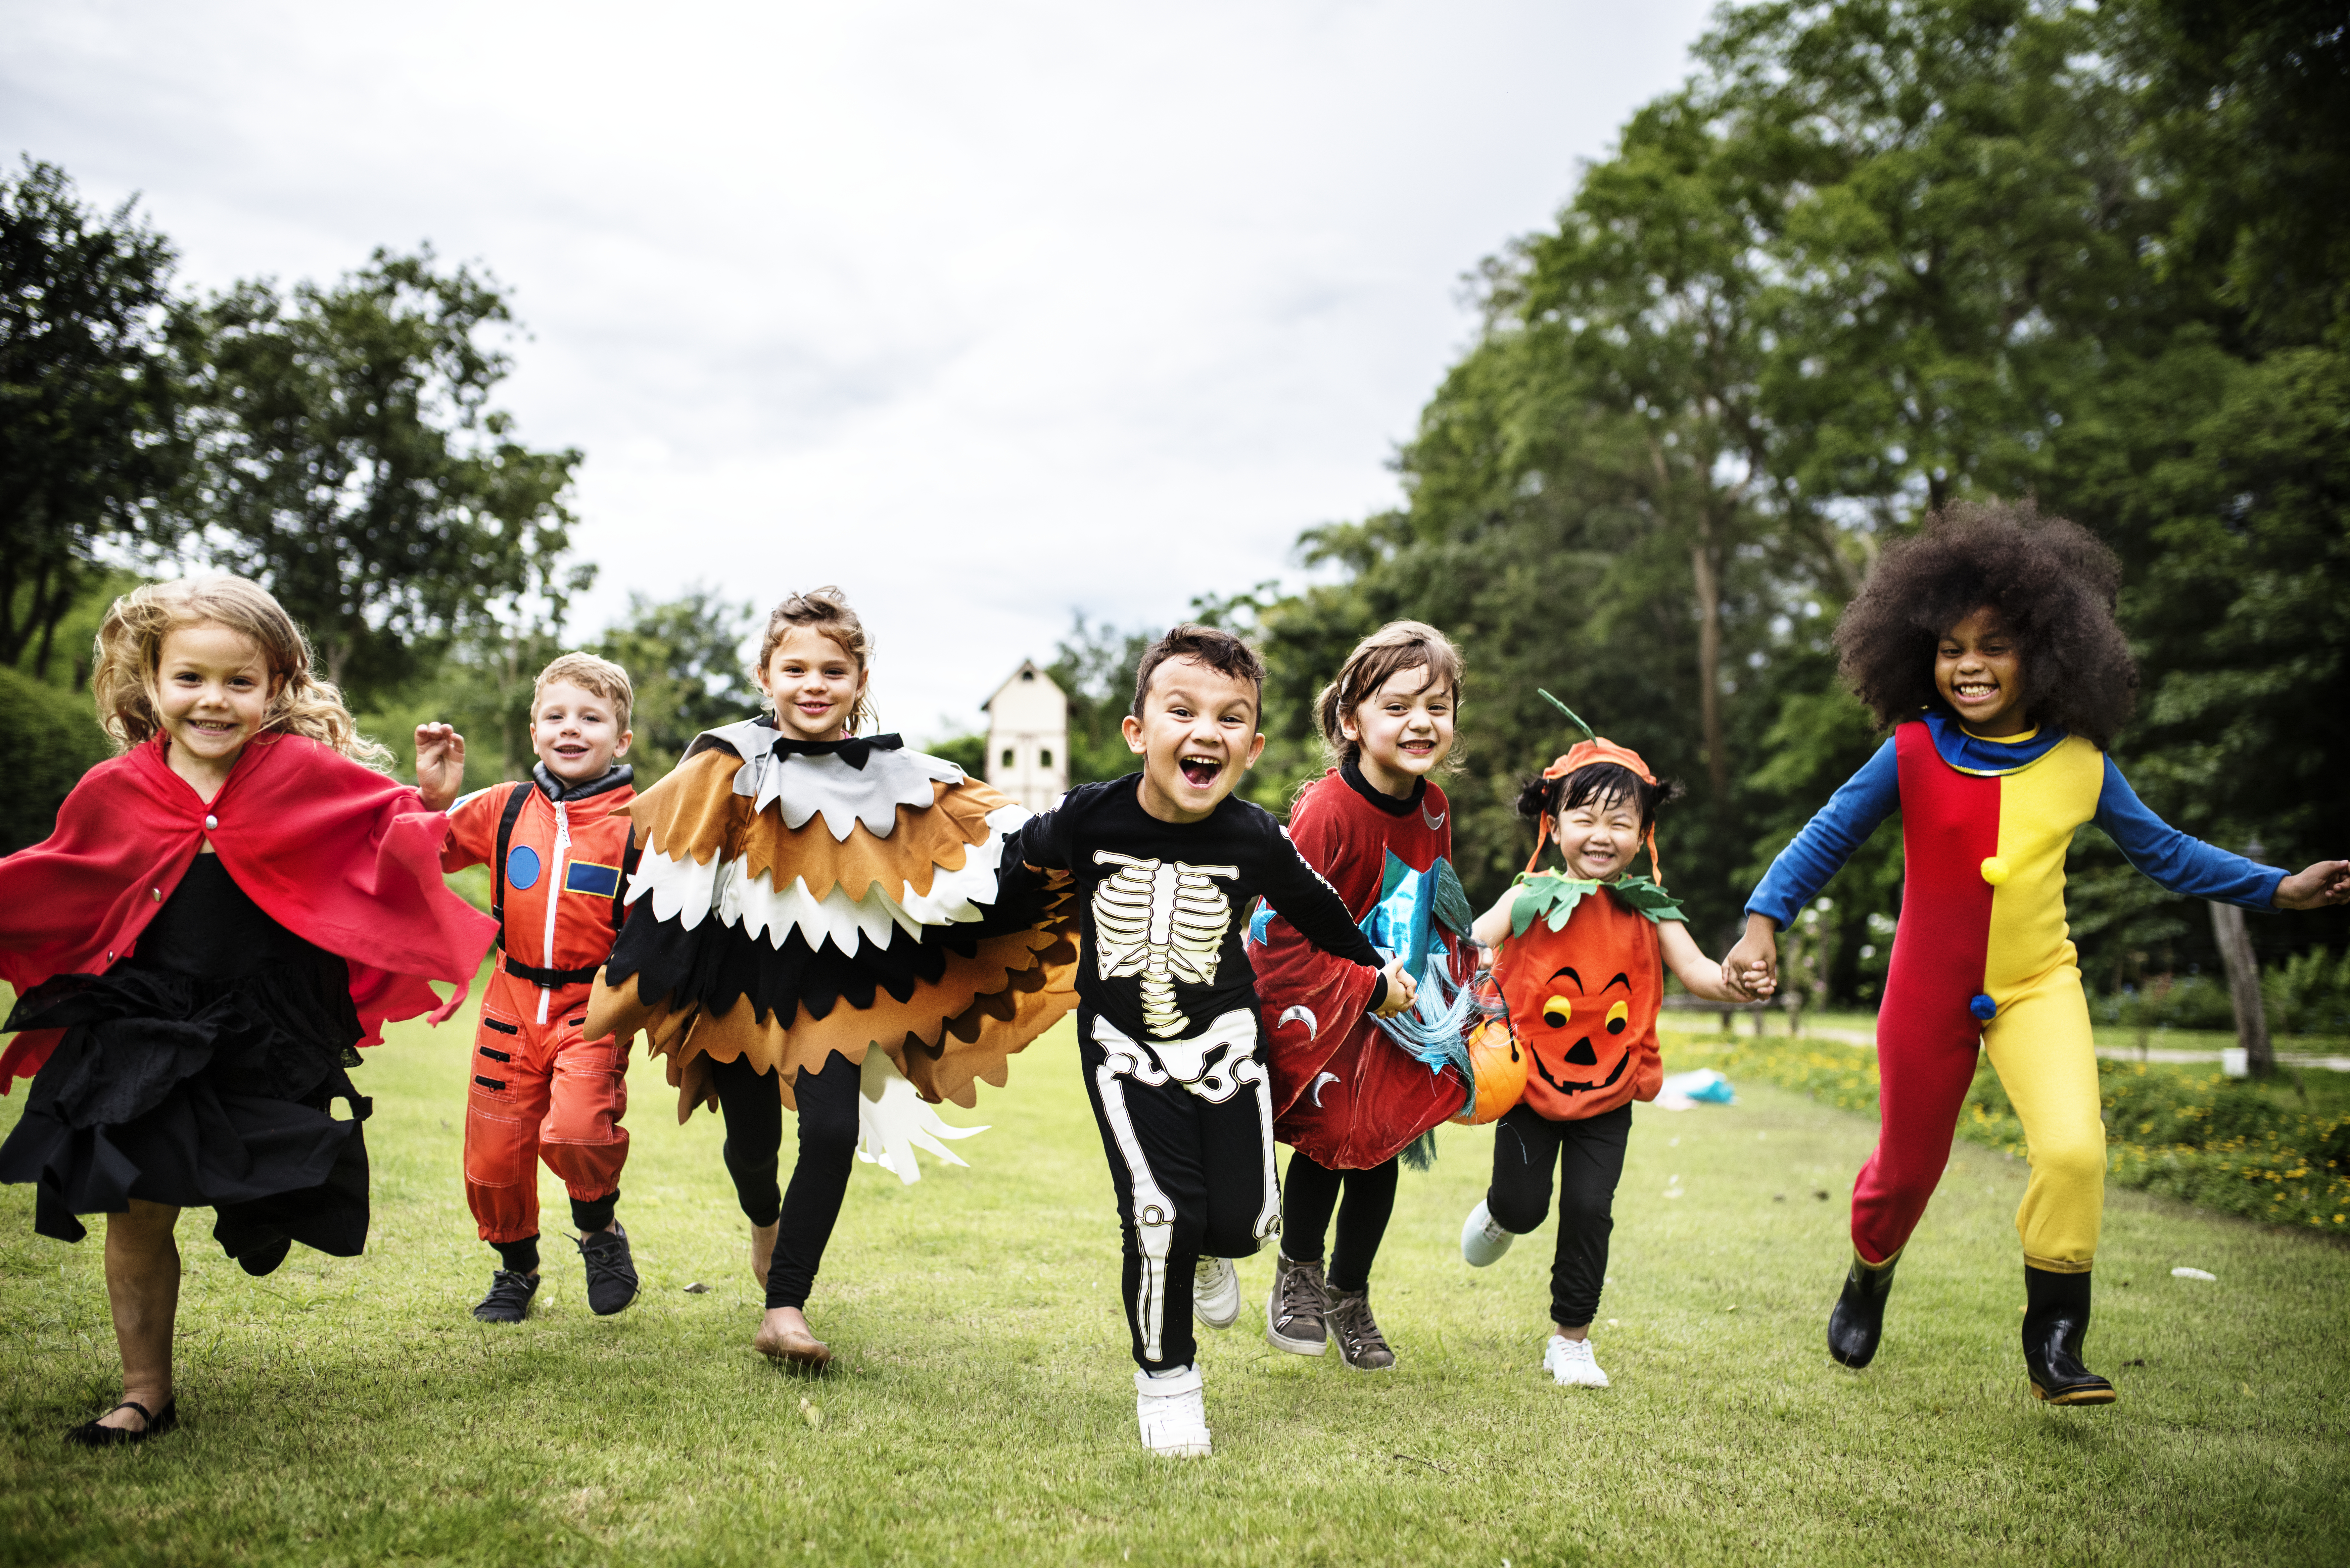 7 kids in various costumes running toward the camera on a grassy field 